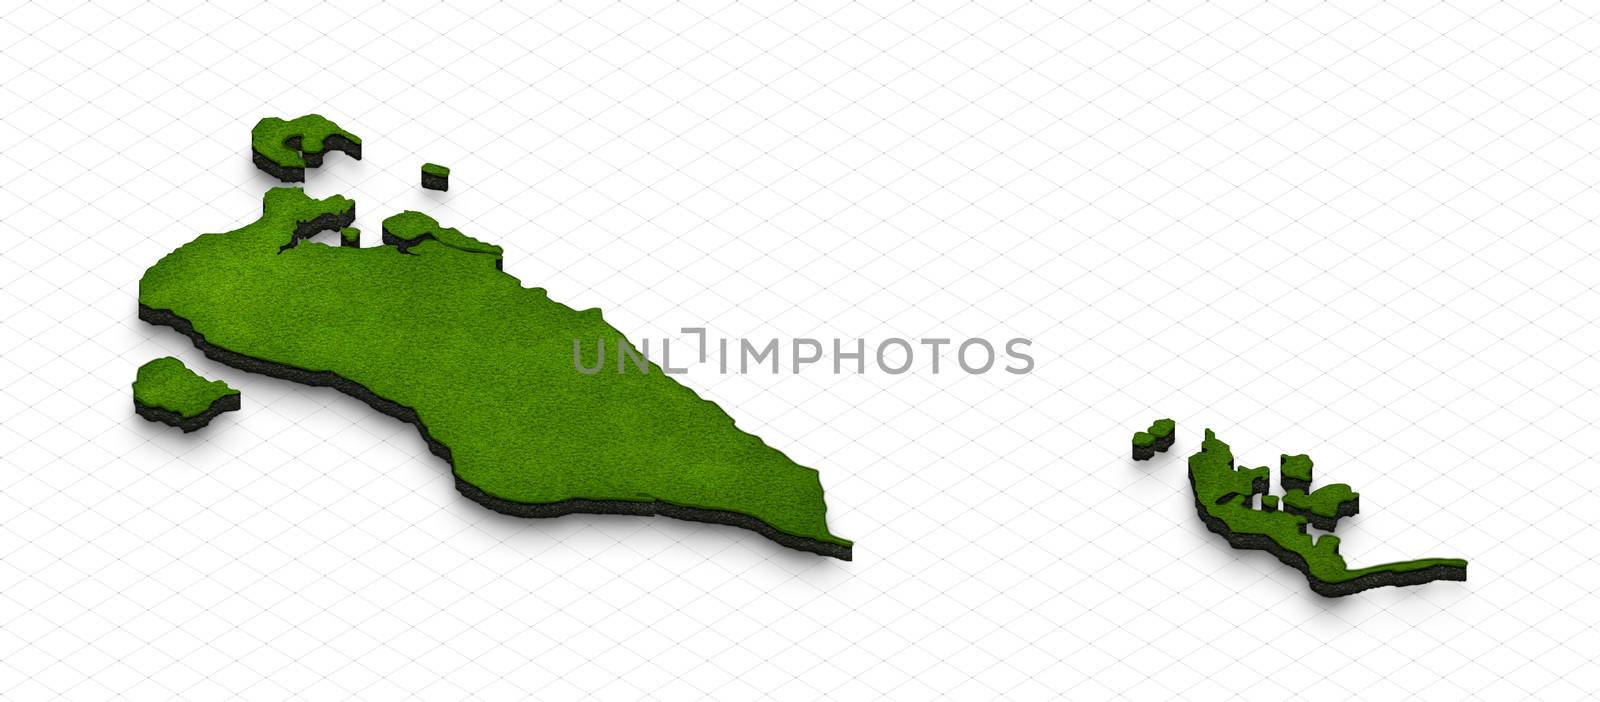 Illustration of a green ground map of Bahrain on grid background. Right 3D isometric perspective projection.